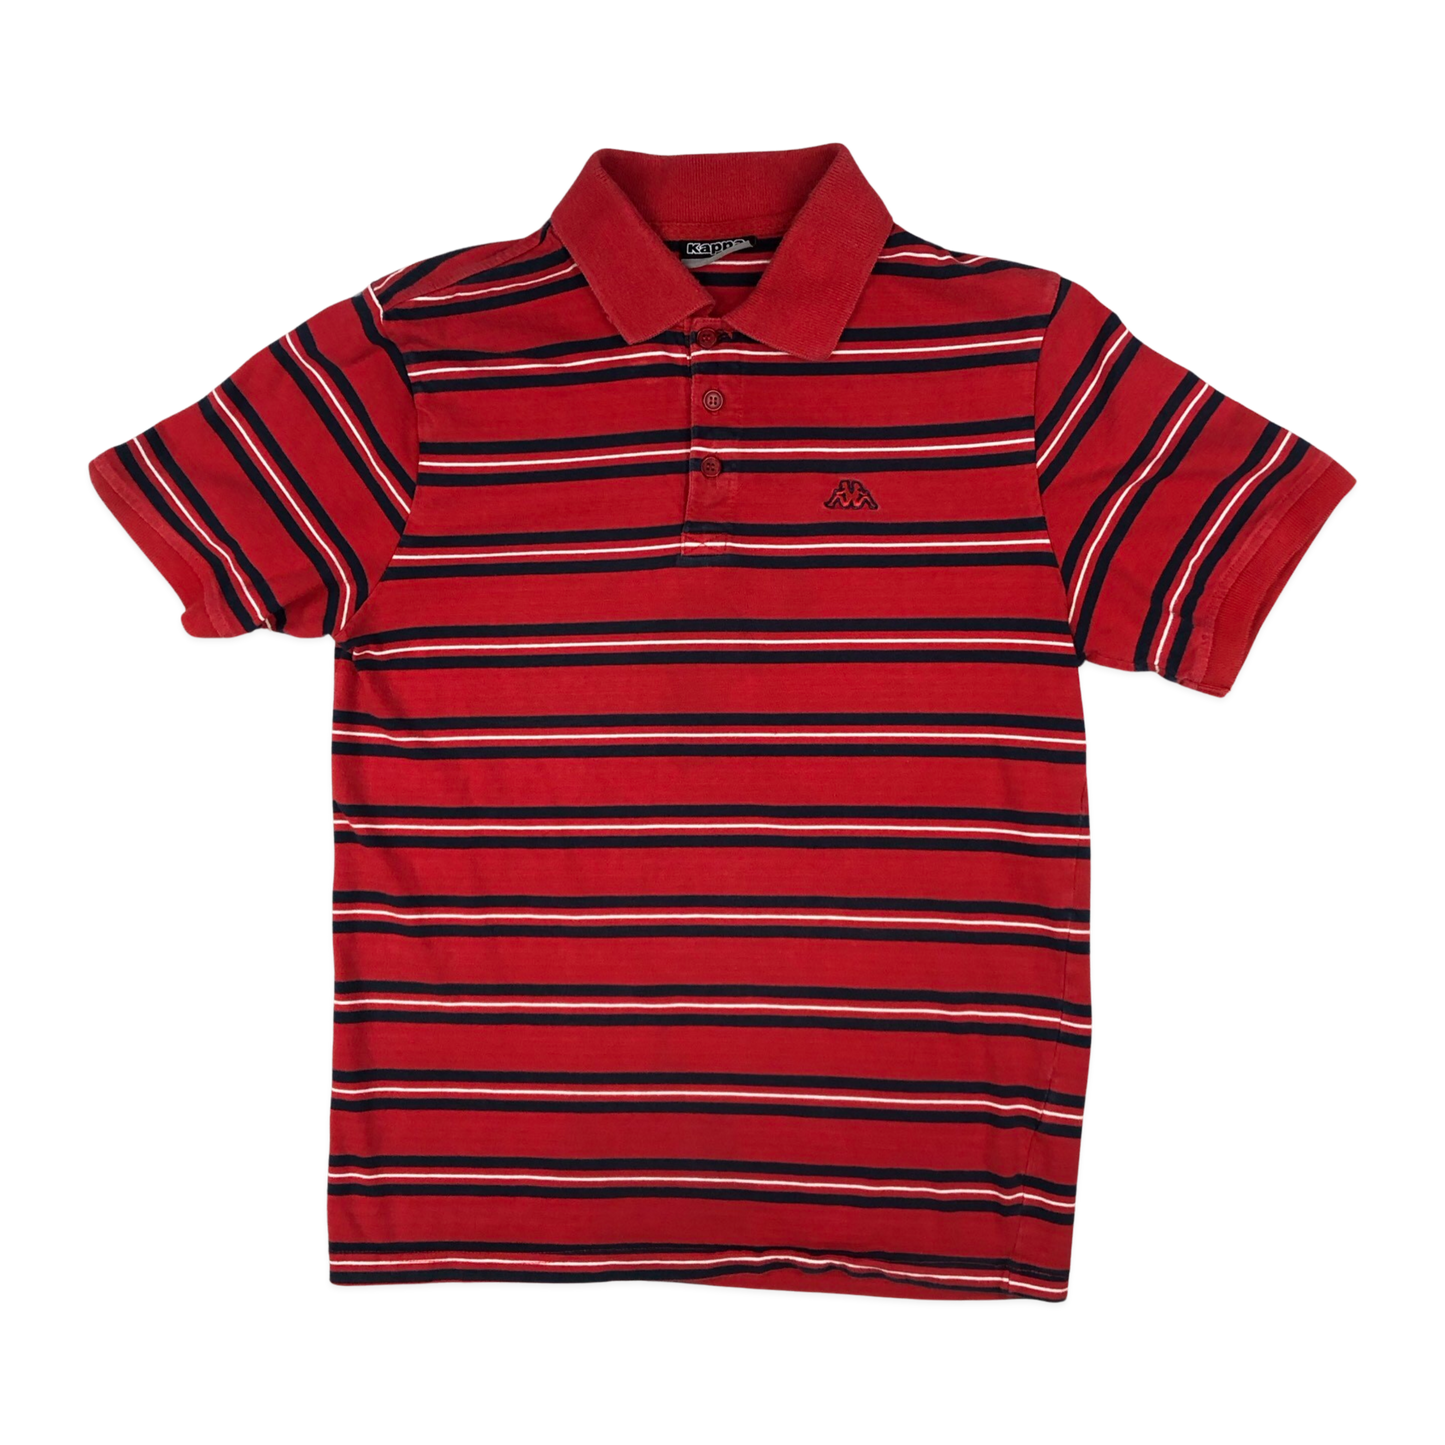 Vintage Kappa Striped Red and Navy Polo Shirt